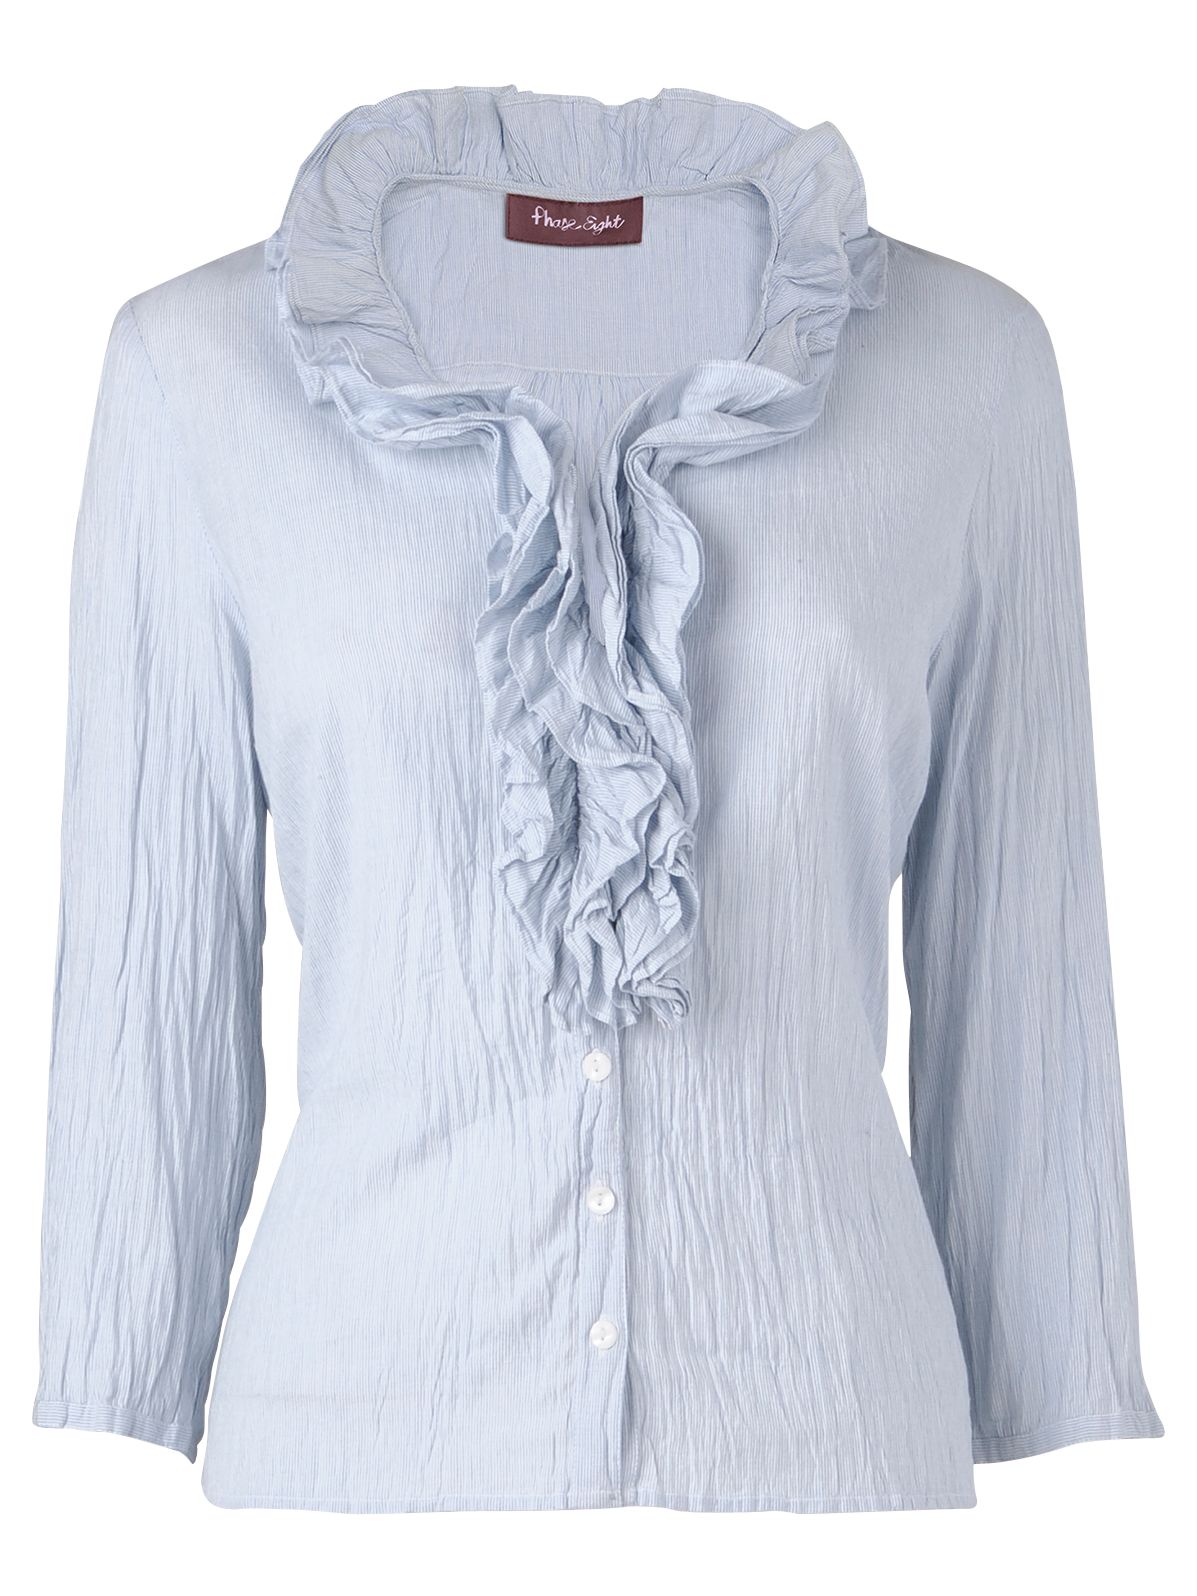 Phase Eight Crushed Frill Blouse, Blue/White